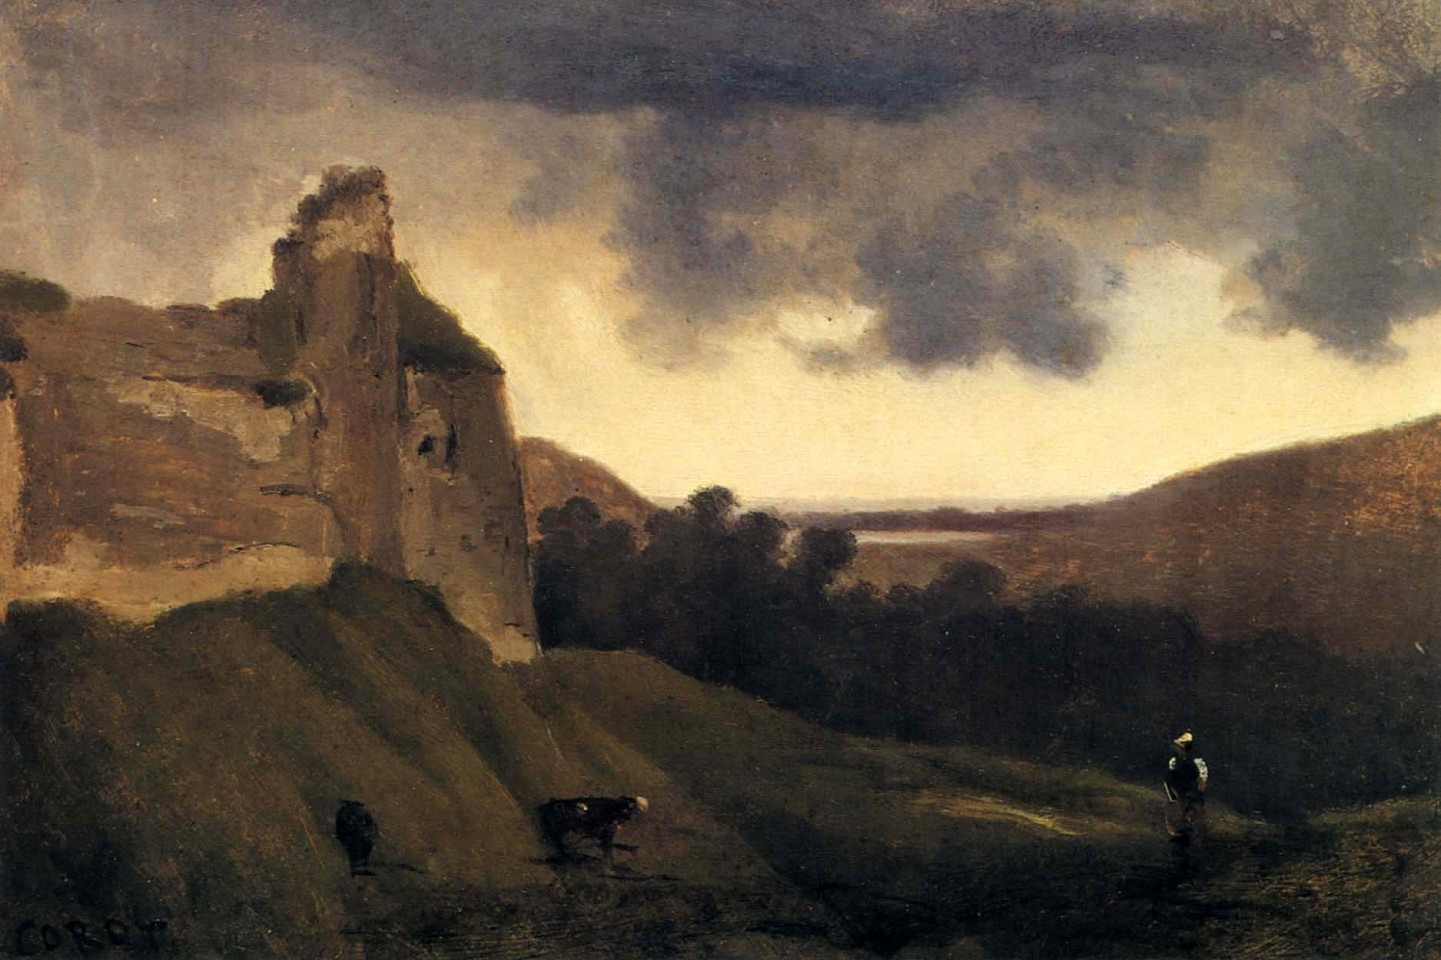 Jean Baptiste Camille Corot, Argues-Ruines du Chateau, 1828-30
Oil on canvas, 8 1/4 x 12 1/4 in. (21 x 31.1 cm)
COR-005-PA
$90,000